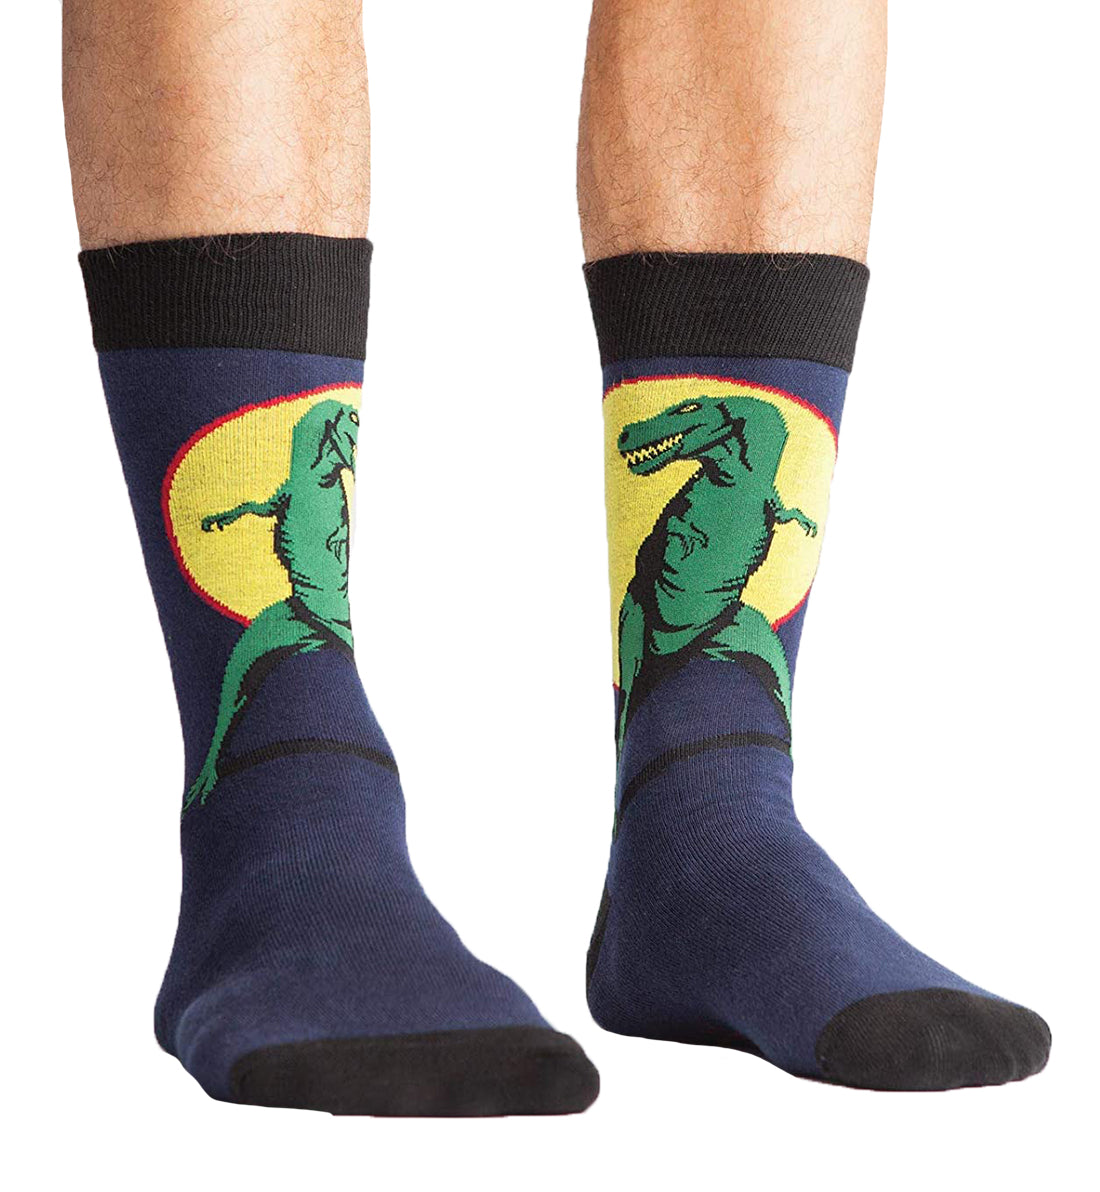 SOCK it to me Men's Crew Socks (mef0073),T-Rex - T-Rex,One Size